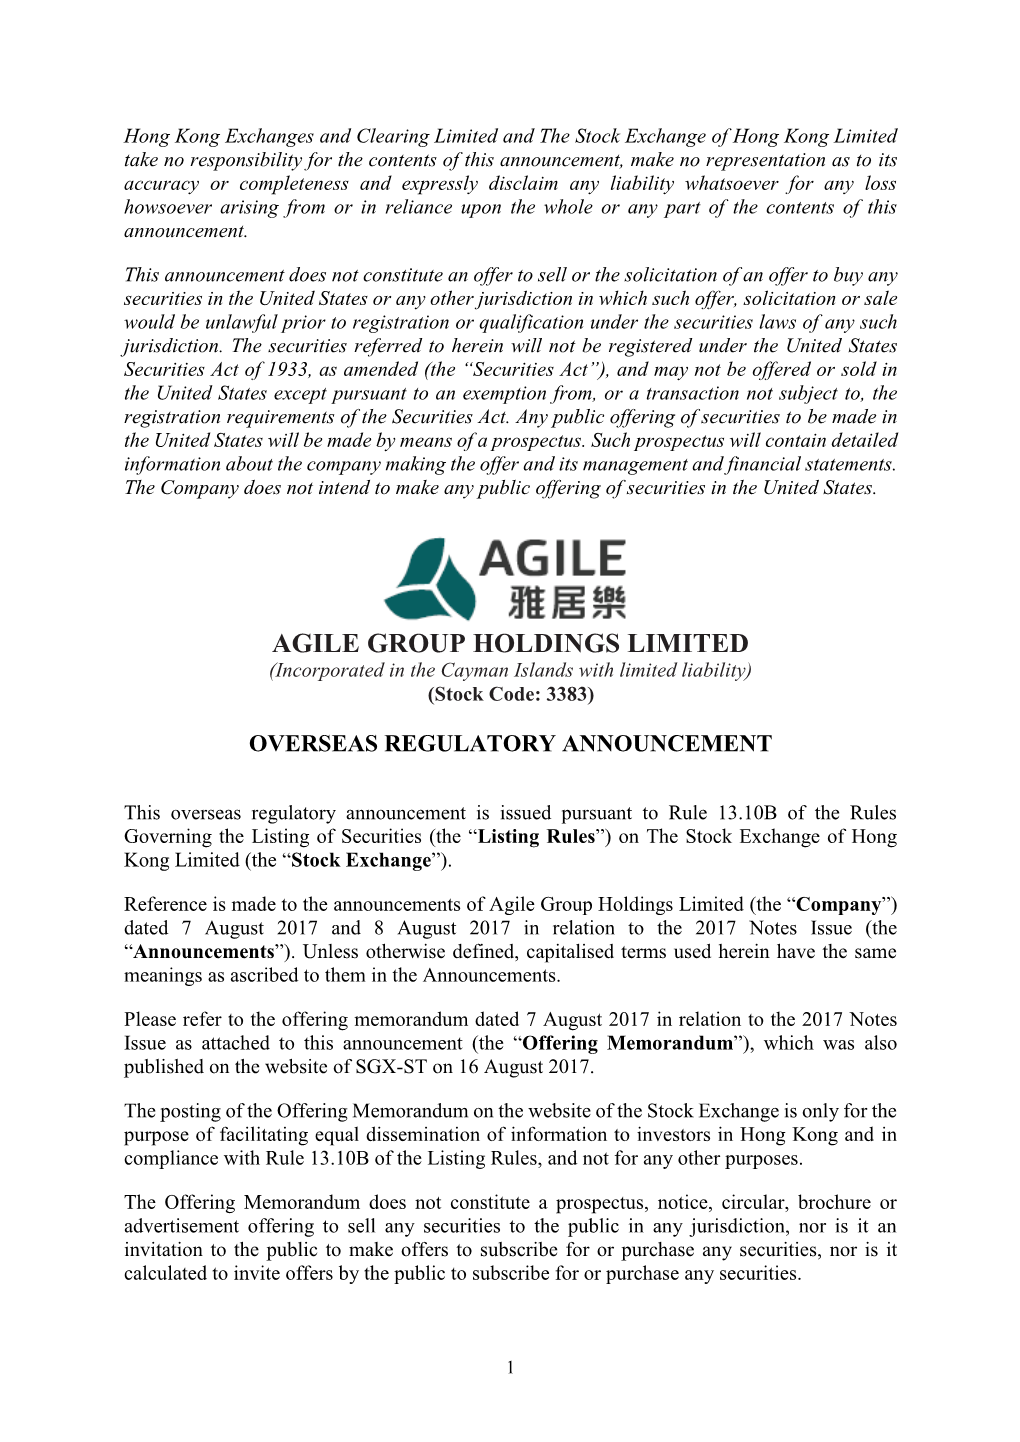 AGILE GROUP HOLDINGS LIMITED (Incorporated in the Cayman Islands with Limited Liability) (Stock Code: 3383)